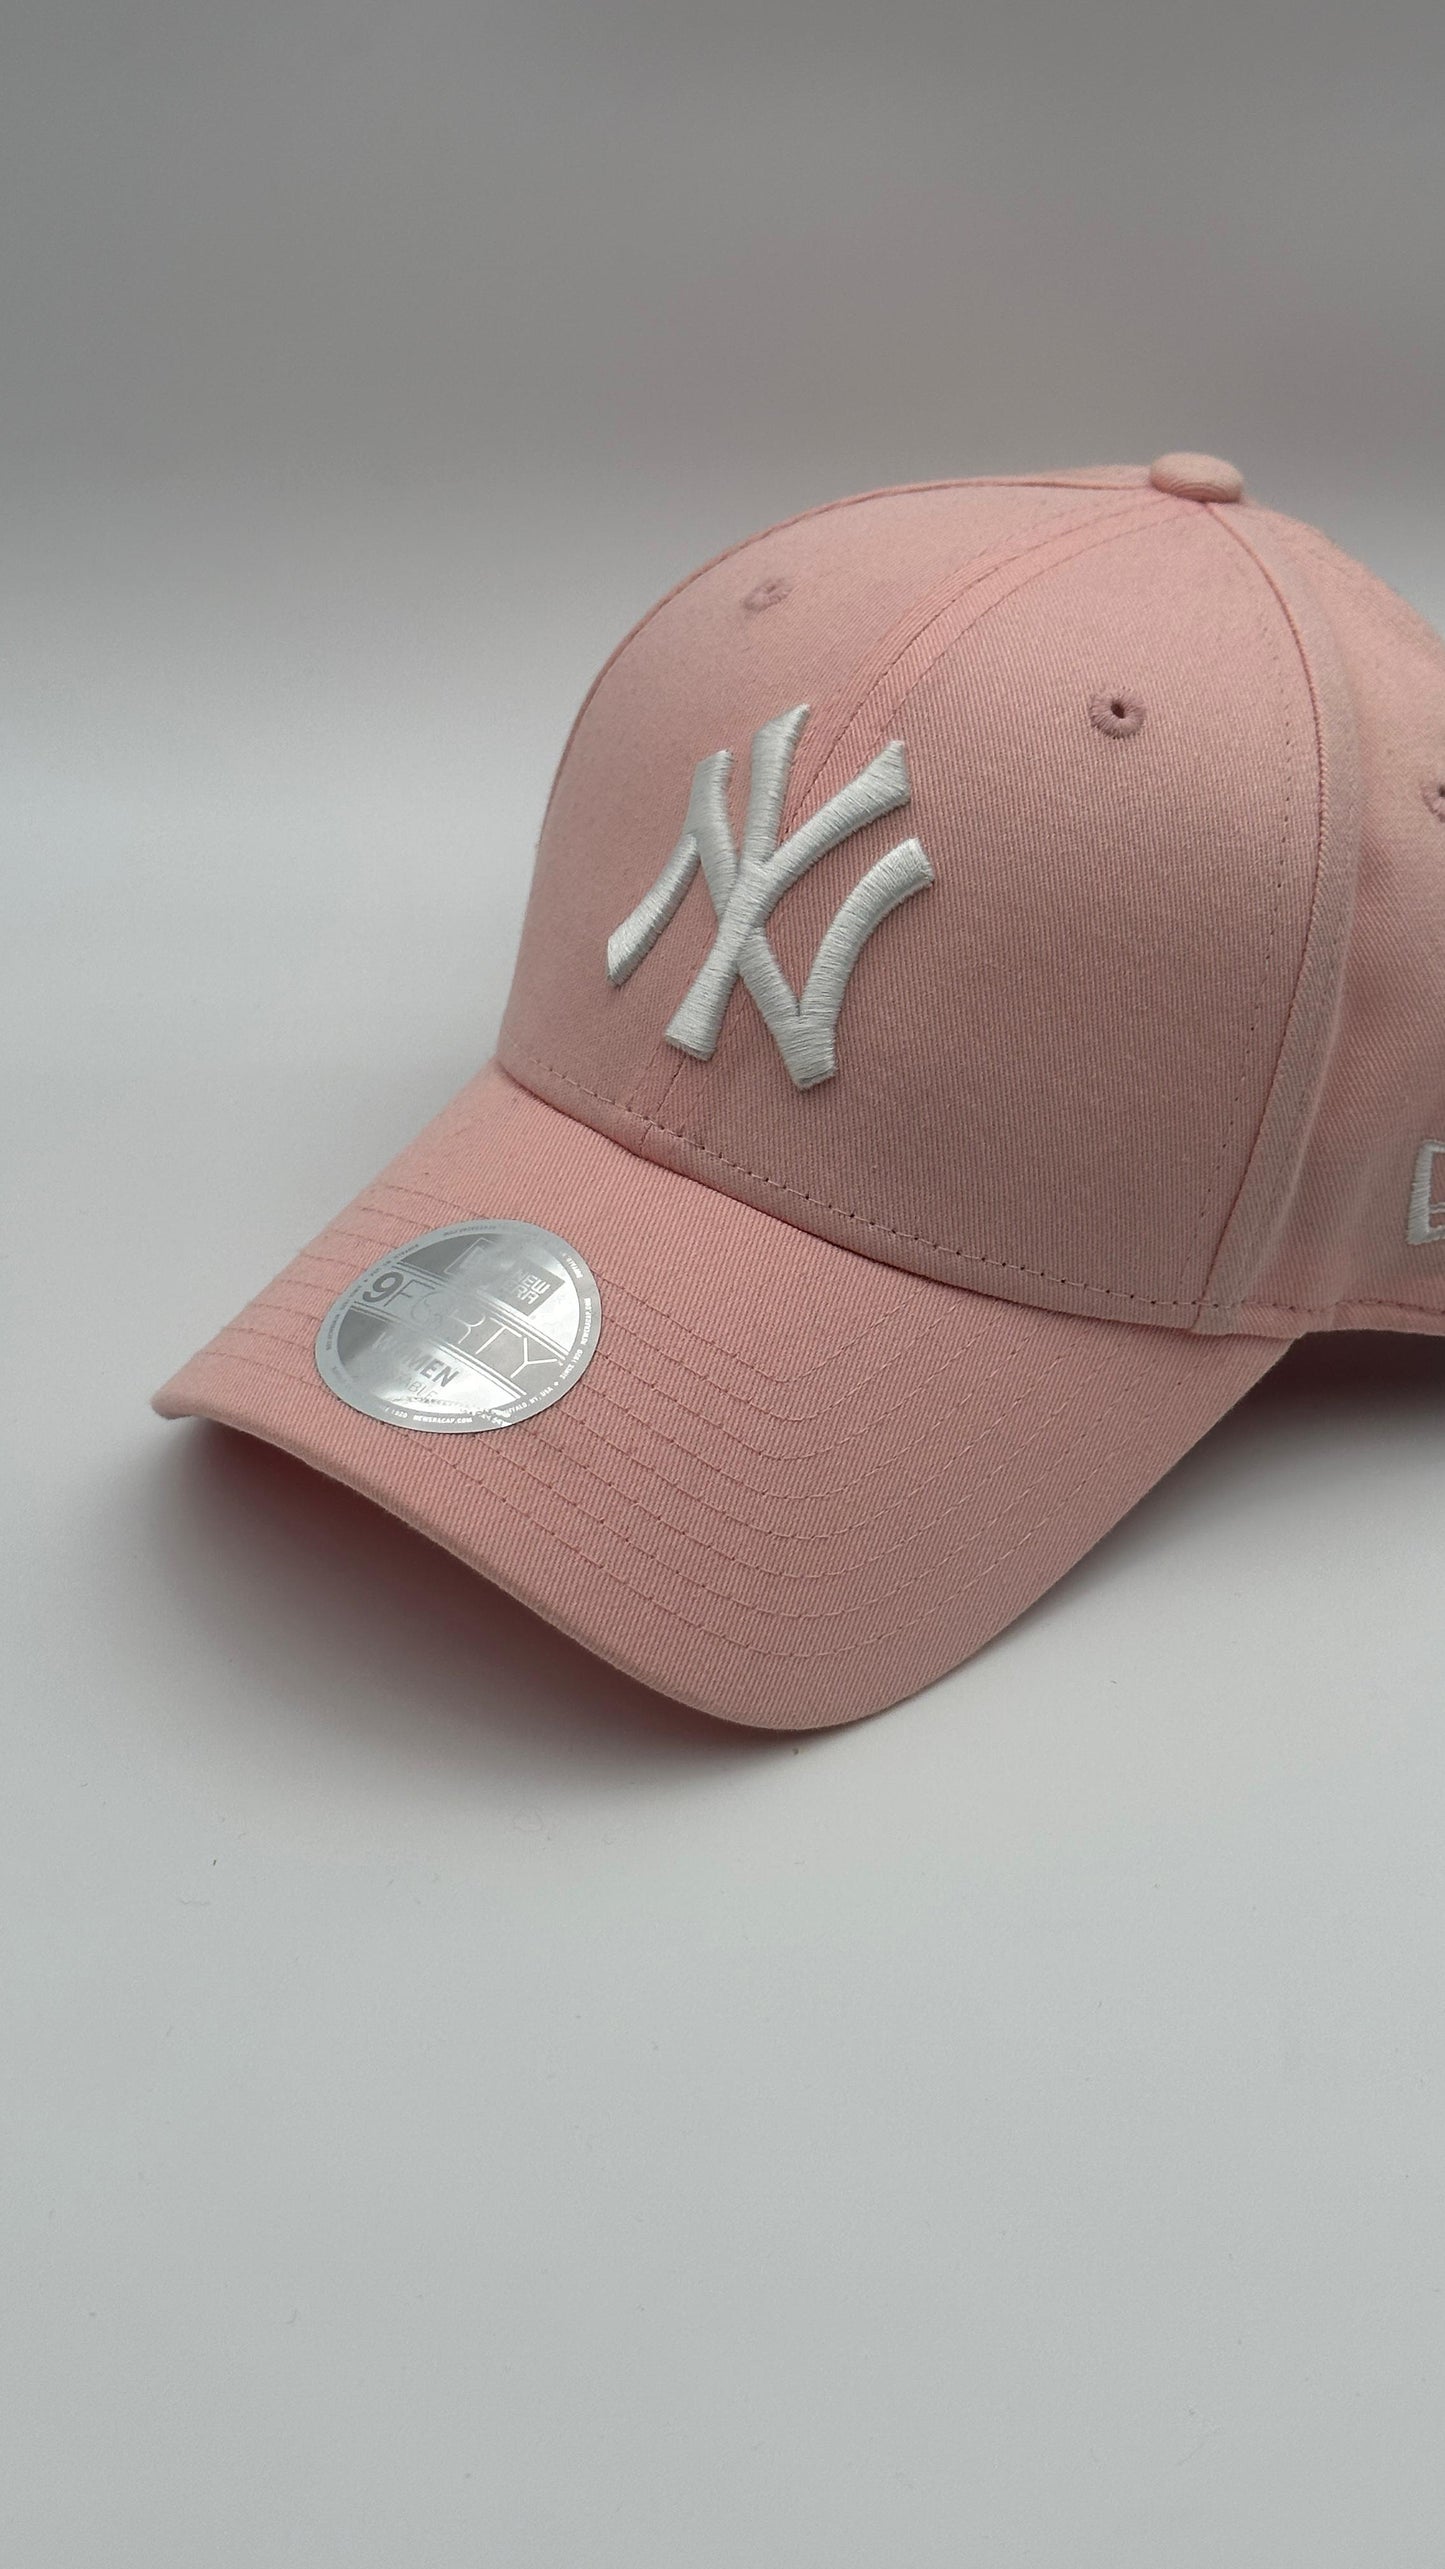 NY NEW ERA “pink” - Butterfly Sneakers